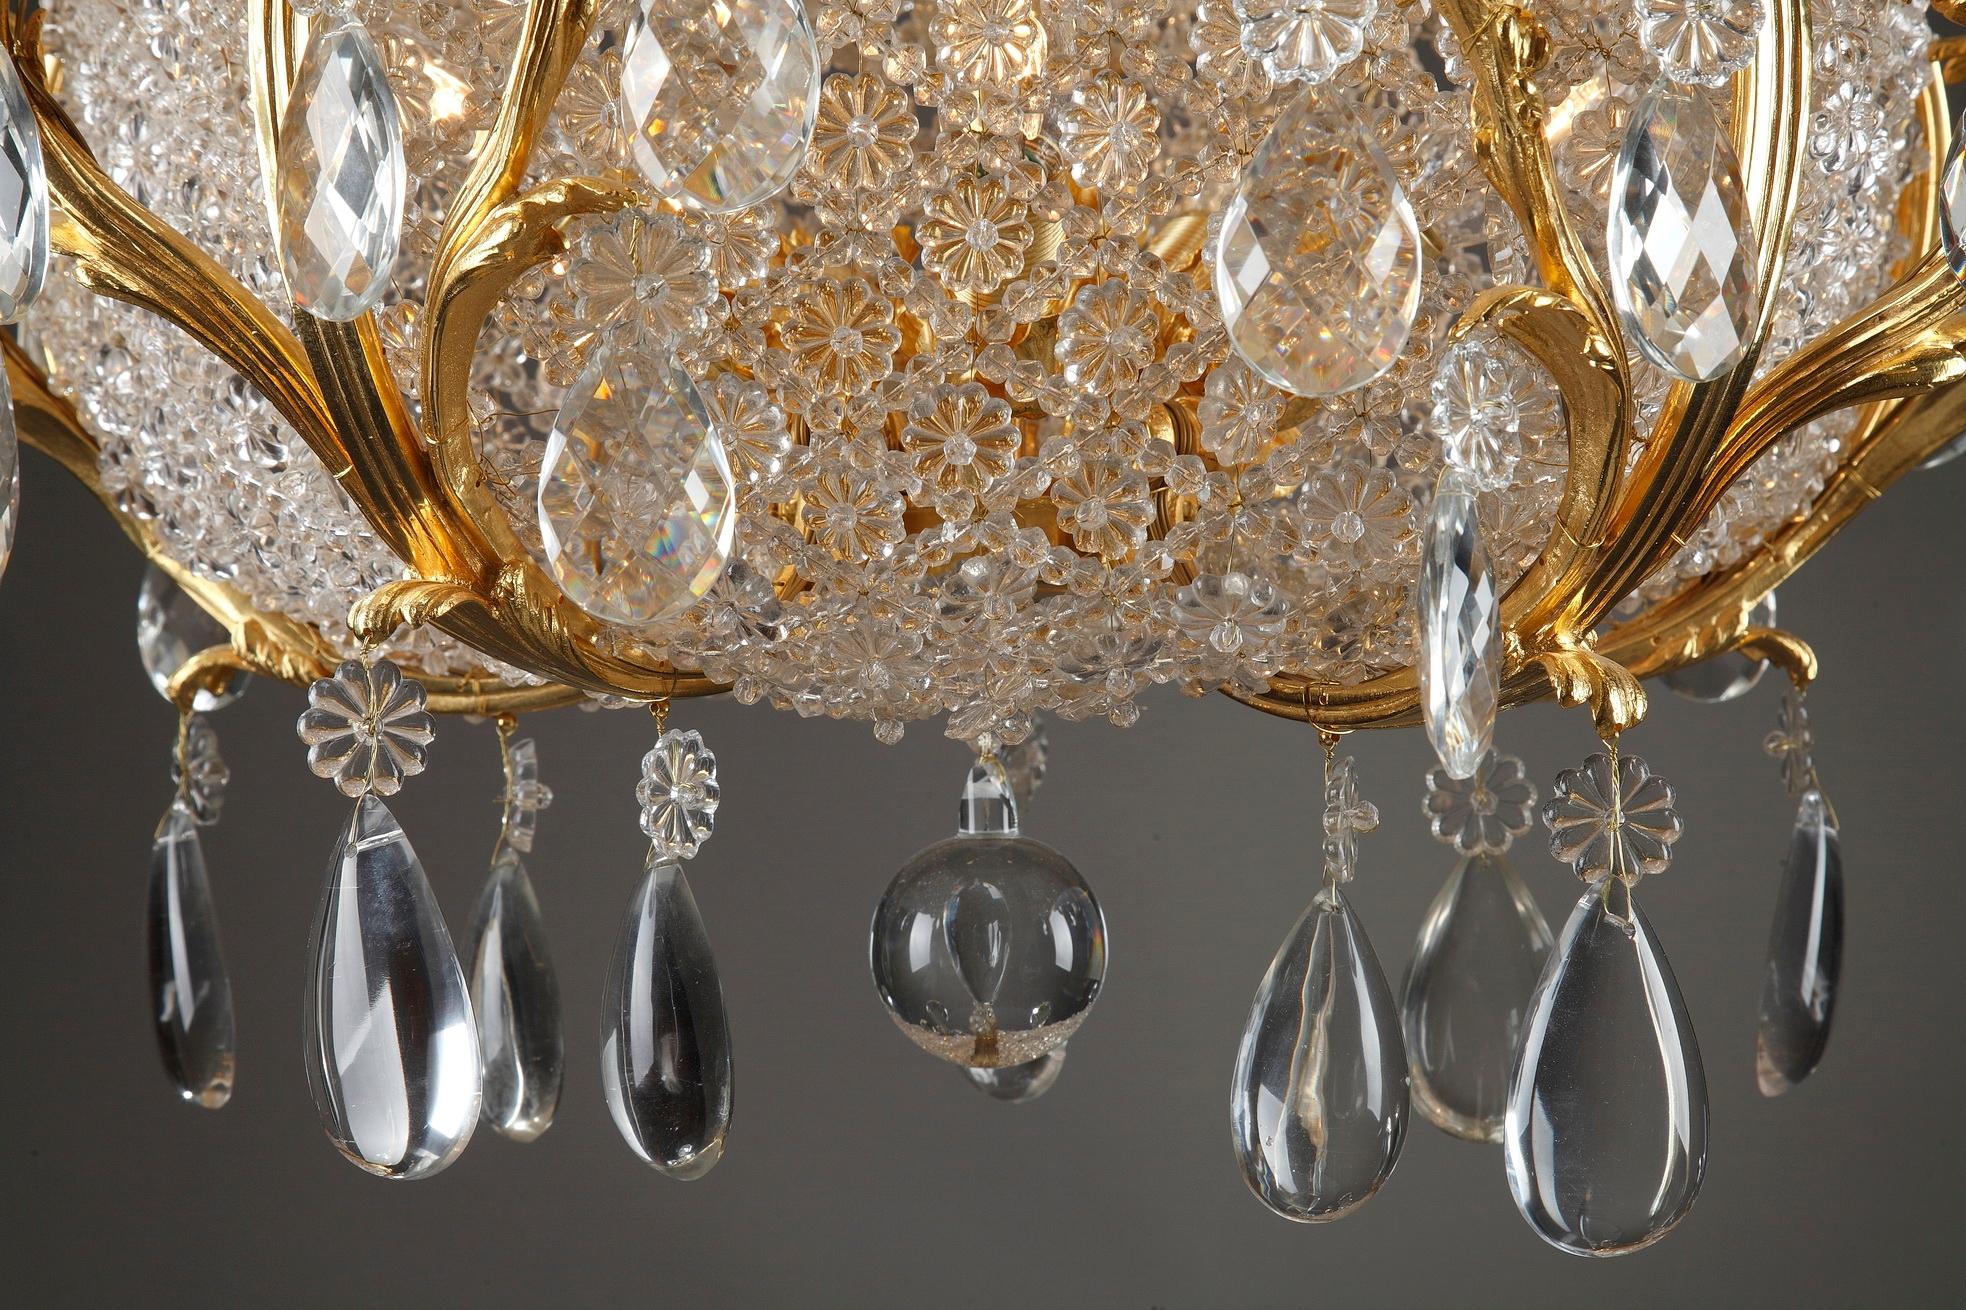 19th Century 10-Light Ormolu and Crystal Basket-Shaped Chandelier For Sale 2